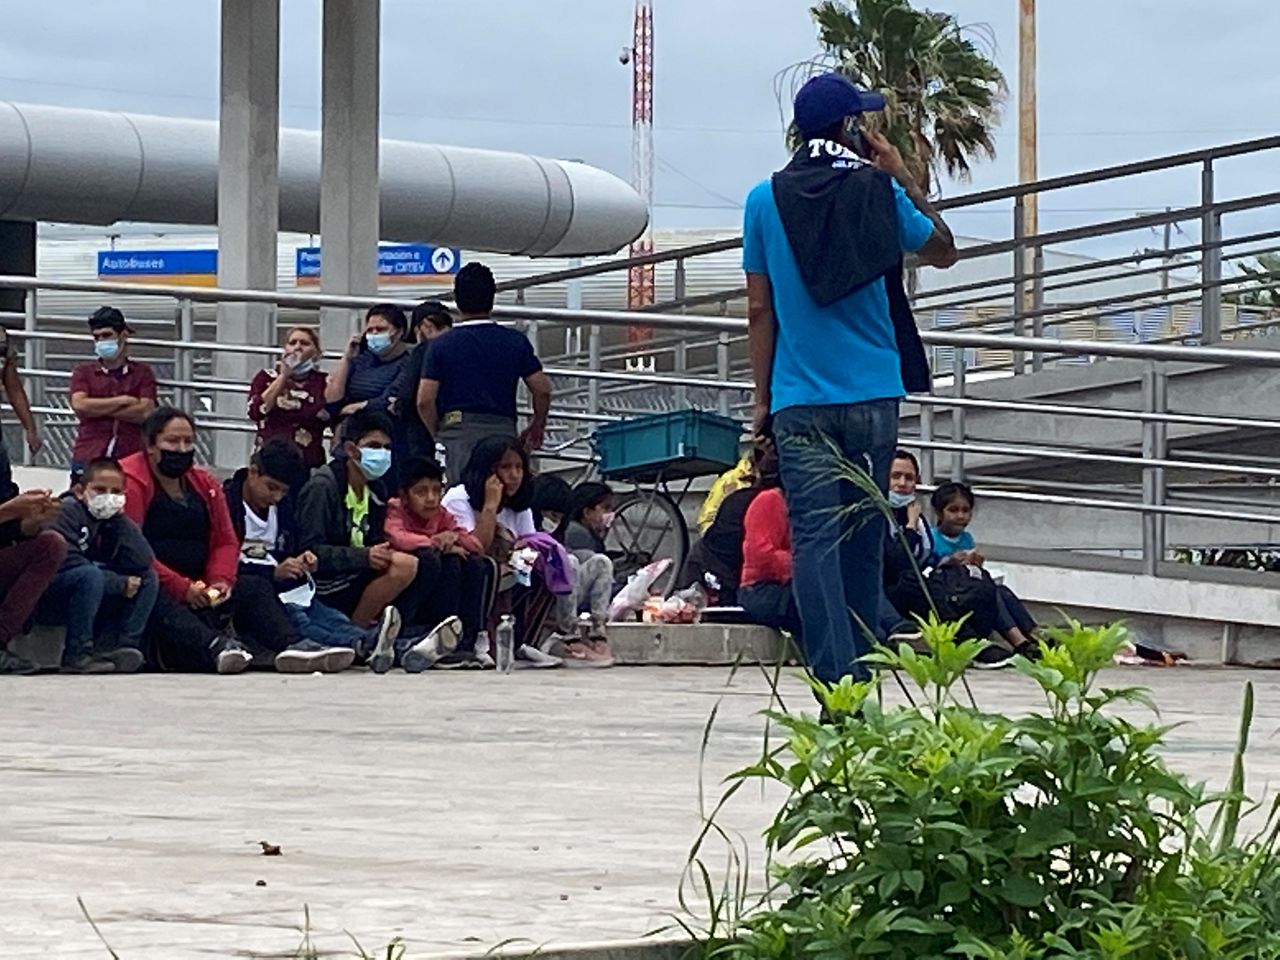 Migrants sit on the stairs of the Mexican customs facility after being expelled to Mexico. (Spectrum News 1/Adolfo Muniz)